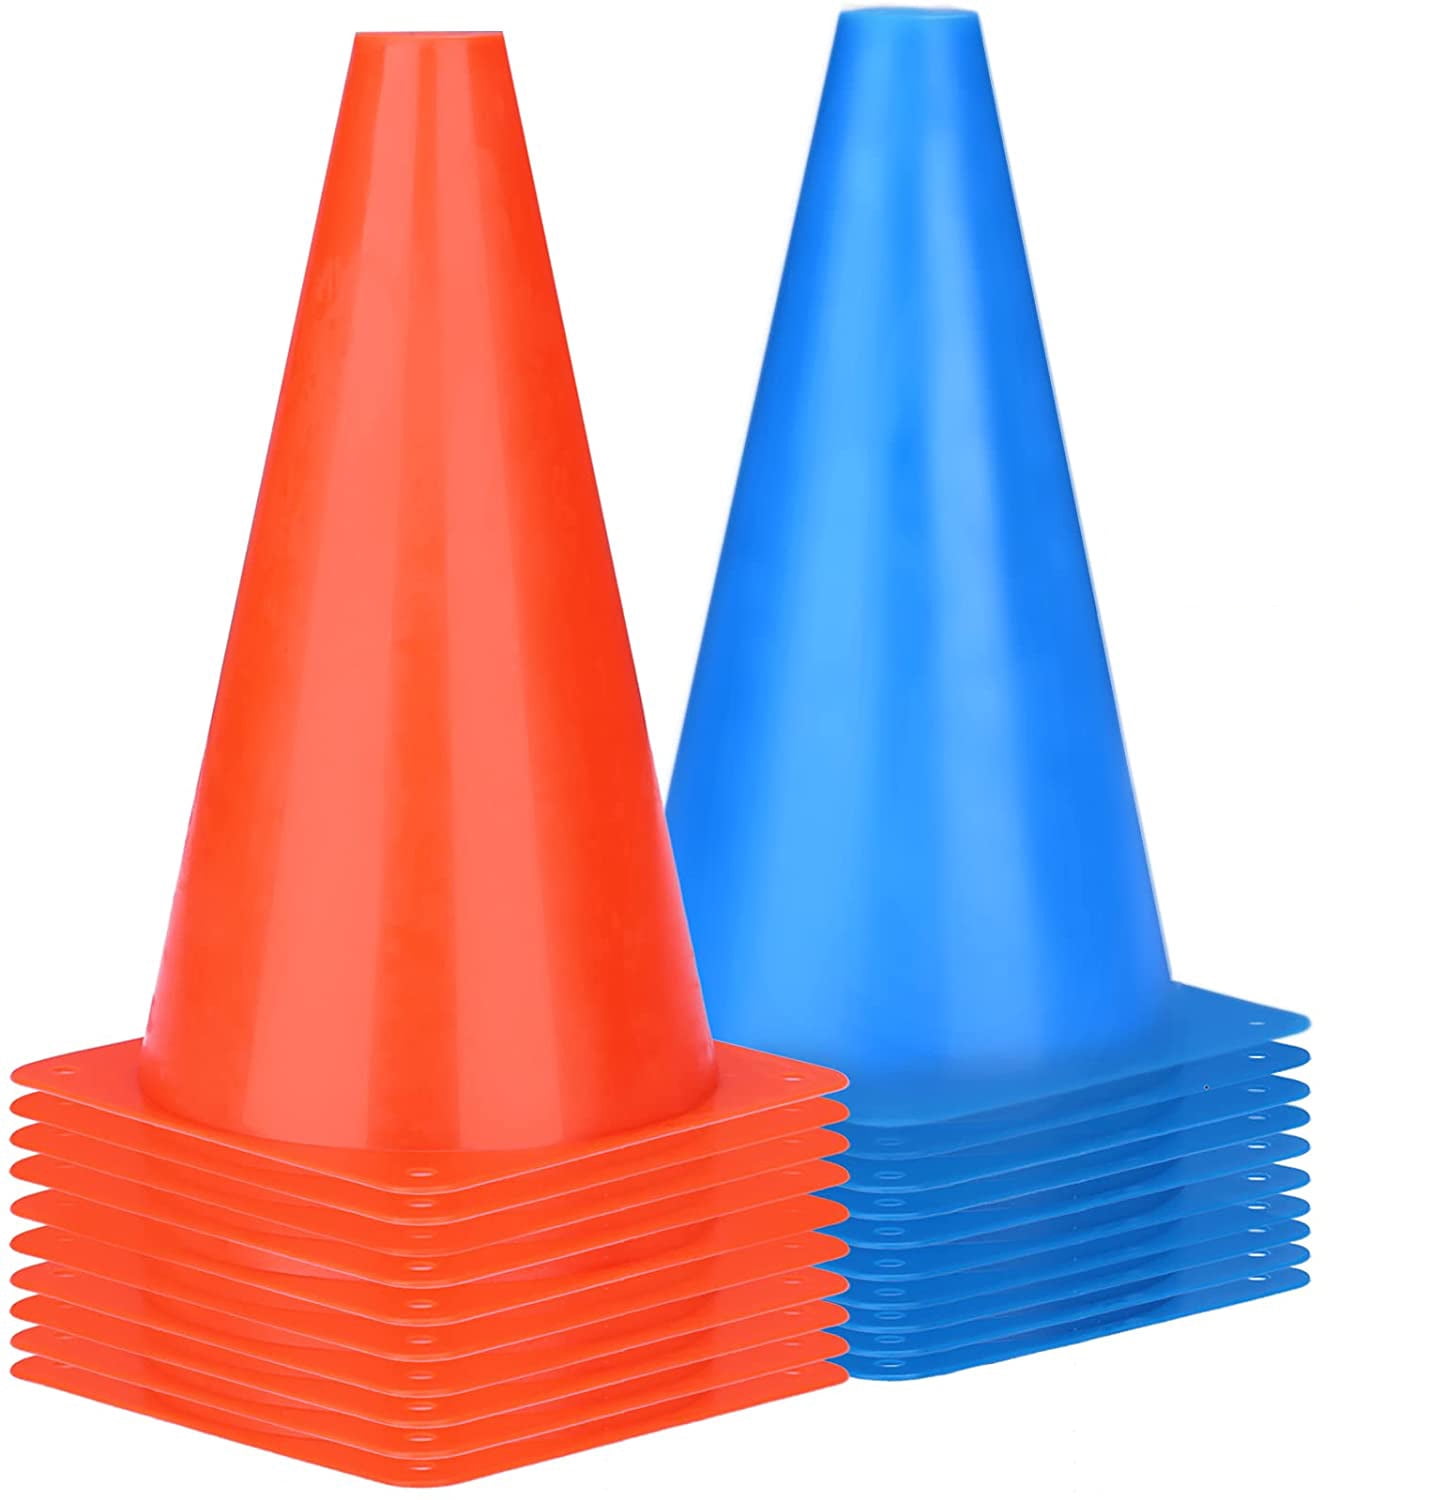 XPRT Fitness Soccer Cones Set of 50 Sports Drills Agility Training Durable 